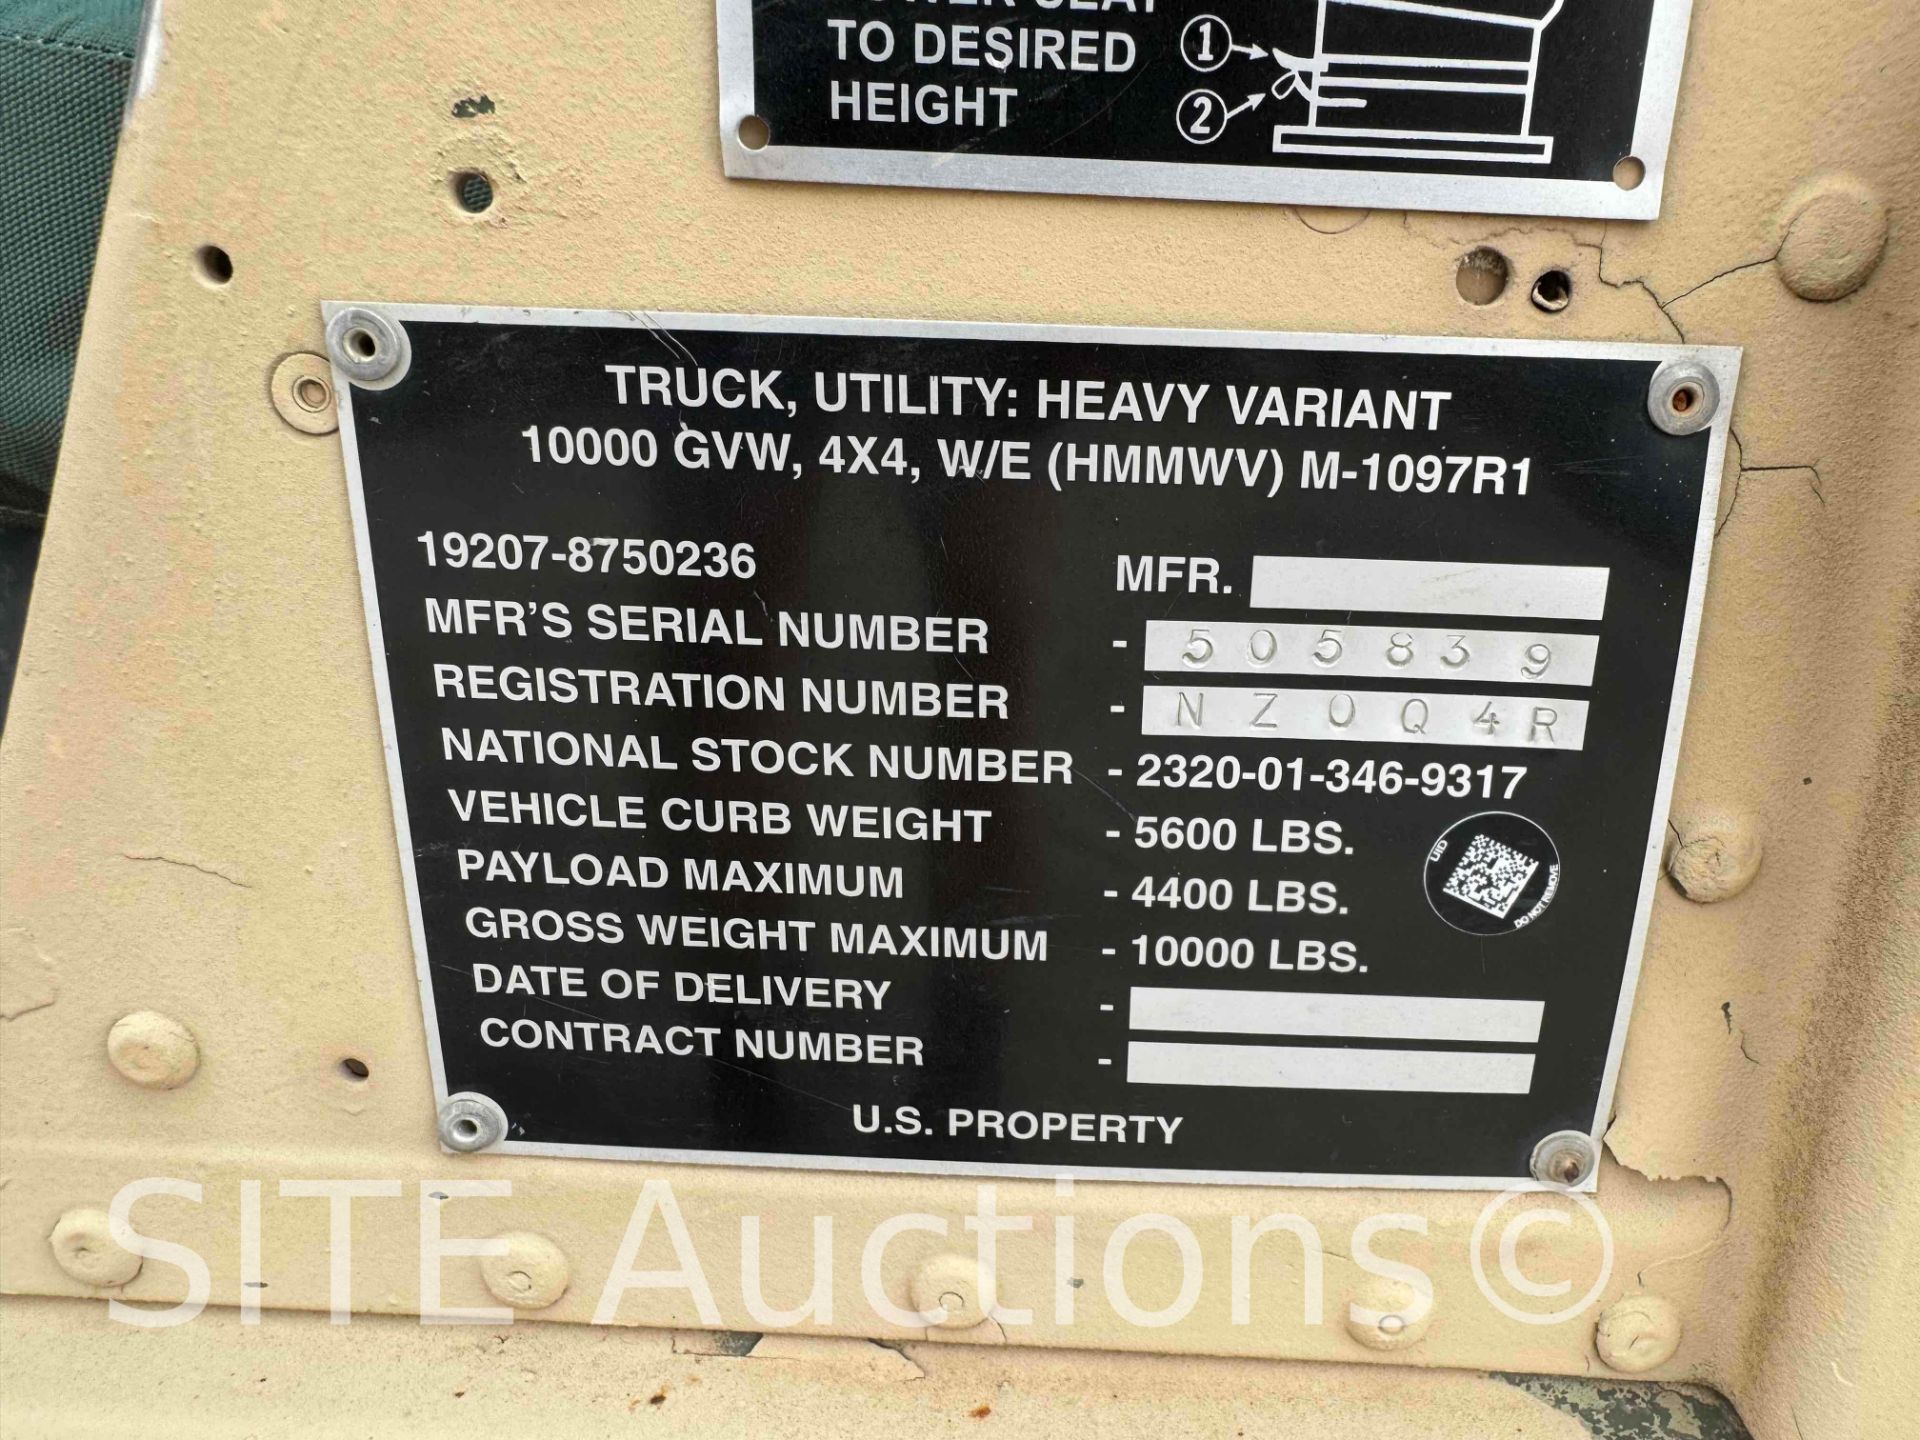 HMMWV M-1097R1 4x4 Military Truck - Image 11 of 15